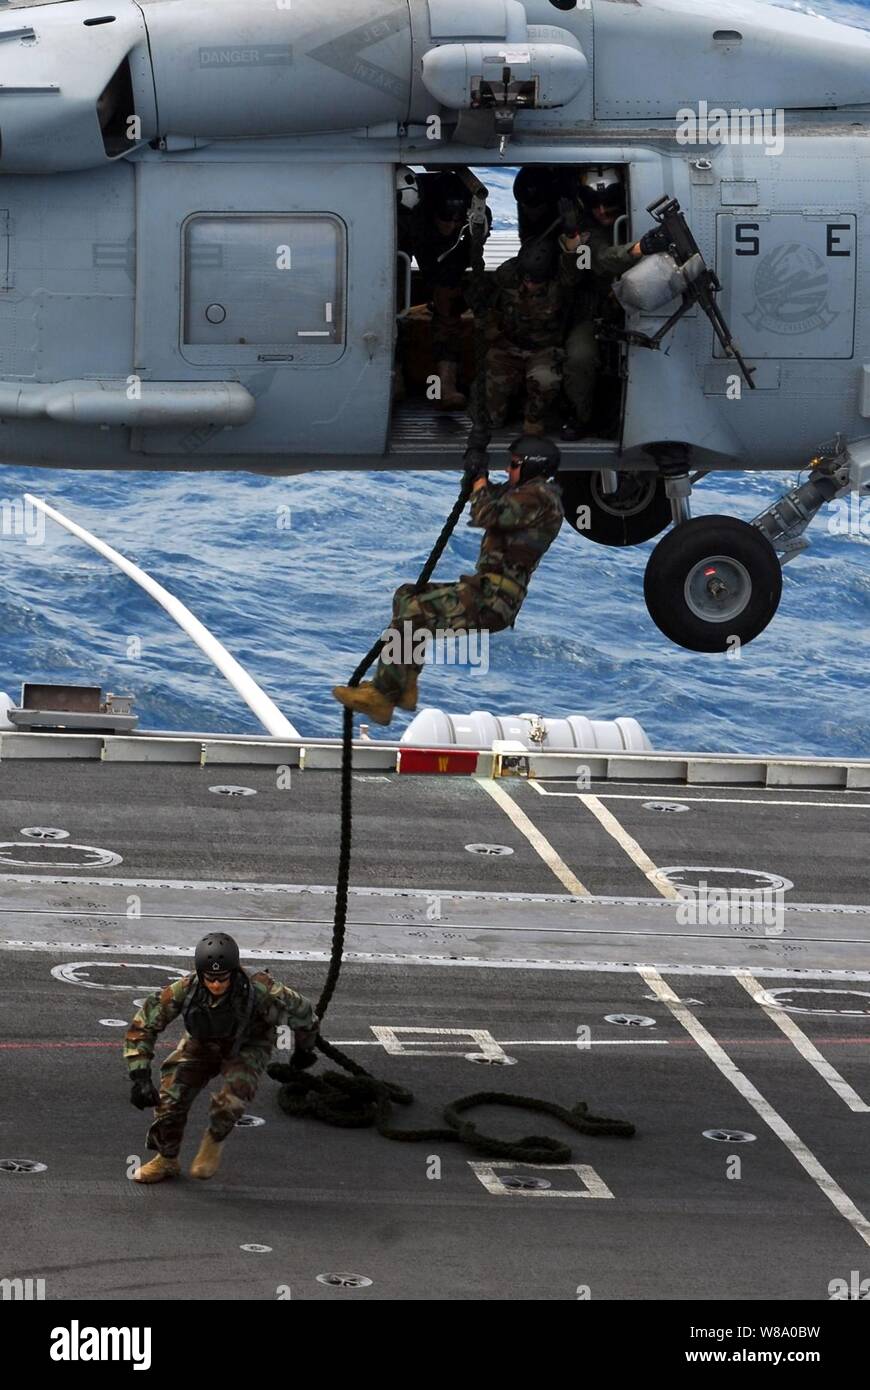 Sailors assigned to Explosive Ordnance Disposal Mobile Unit 5 participate in a fast rope exercise aboard the aircraft carrier USS George Washington (CVN 73) underway in the Indian Ocean on July 7, 2011.  The George Washington began its latest patrol on June 12, departing its forward-operating base at Commander, Fleet Activities Yokosuka. Stock Photo